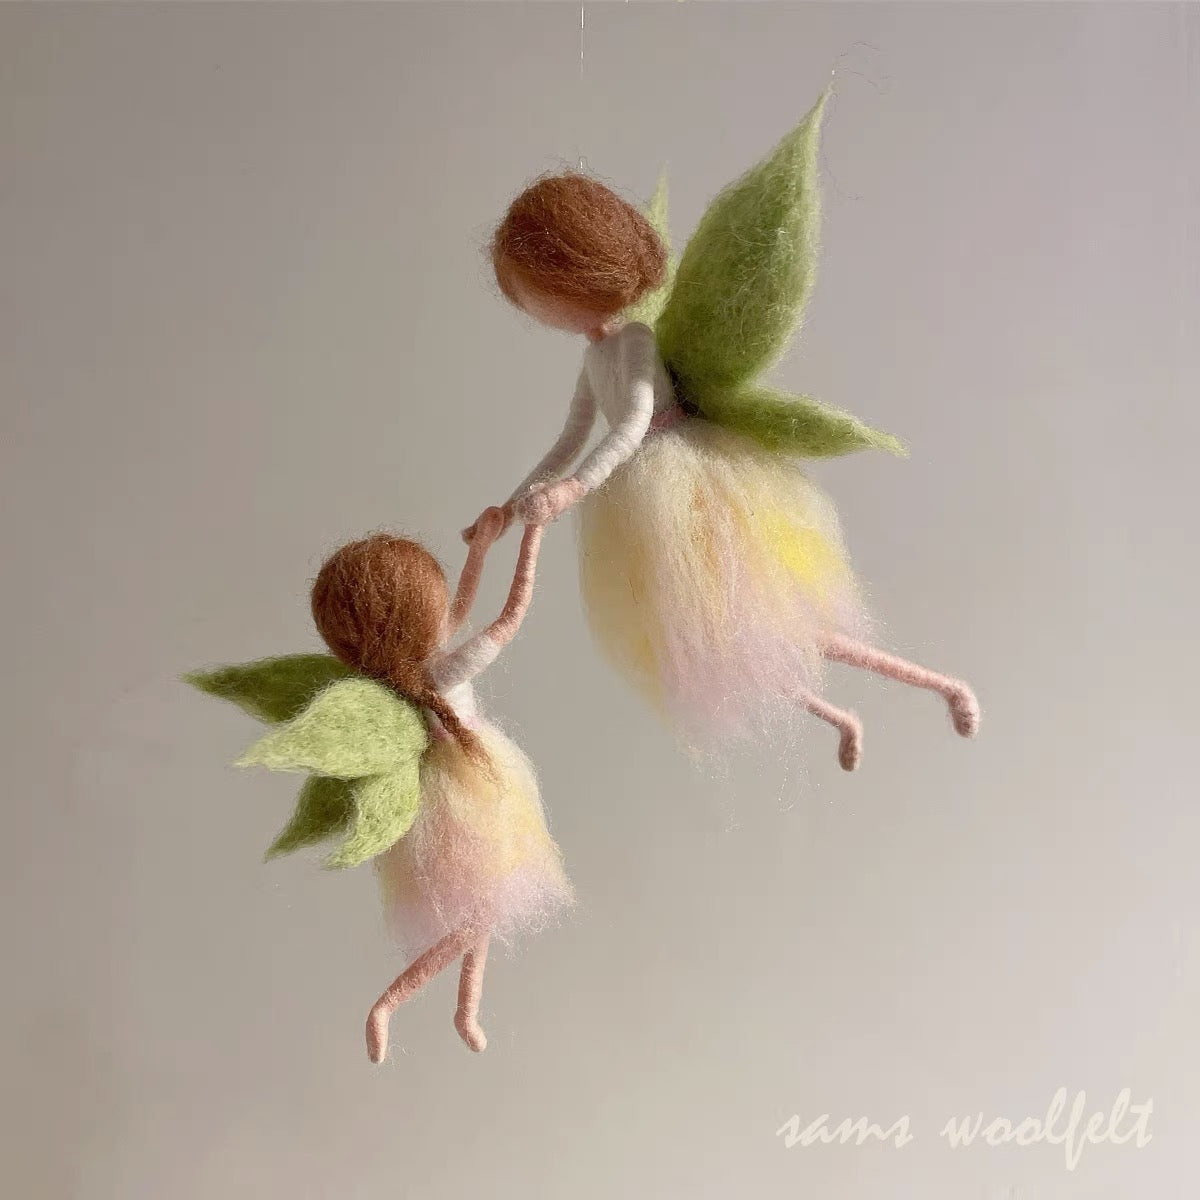 Guardian angel needle felted waldorf doll fairy doll, wool Material Kit Halloween Christmas Gift05